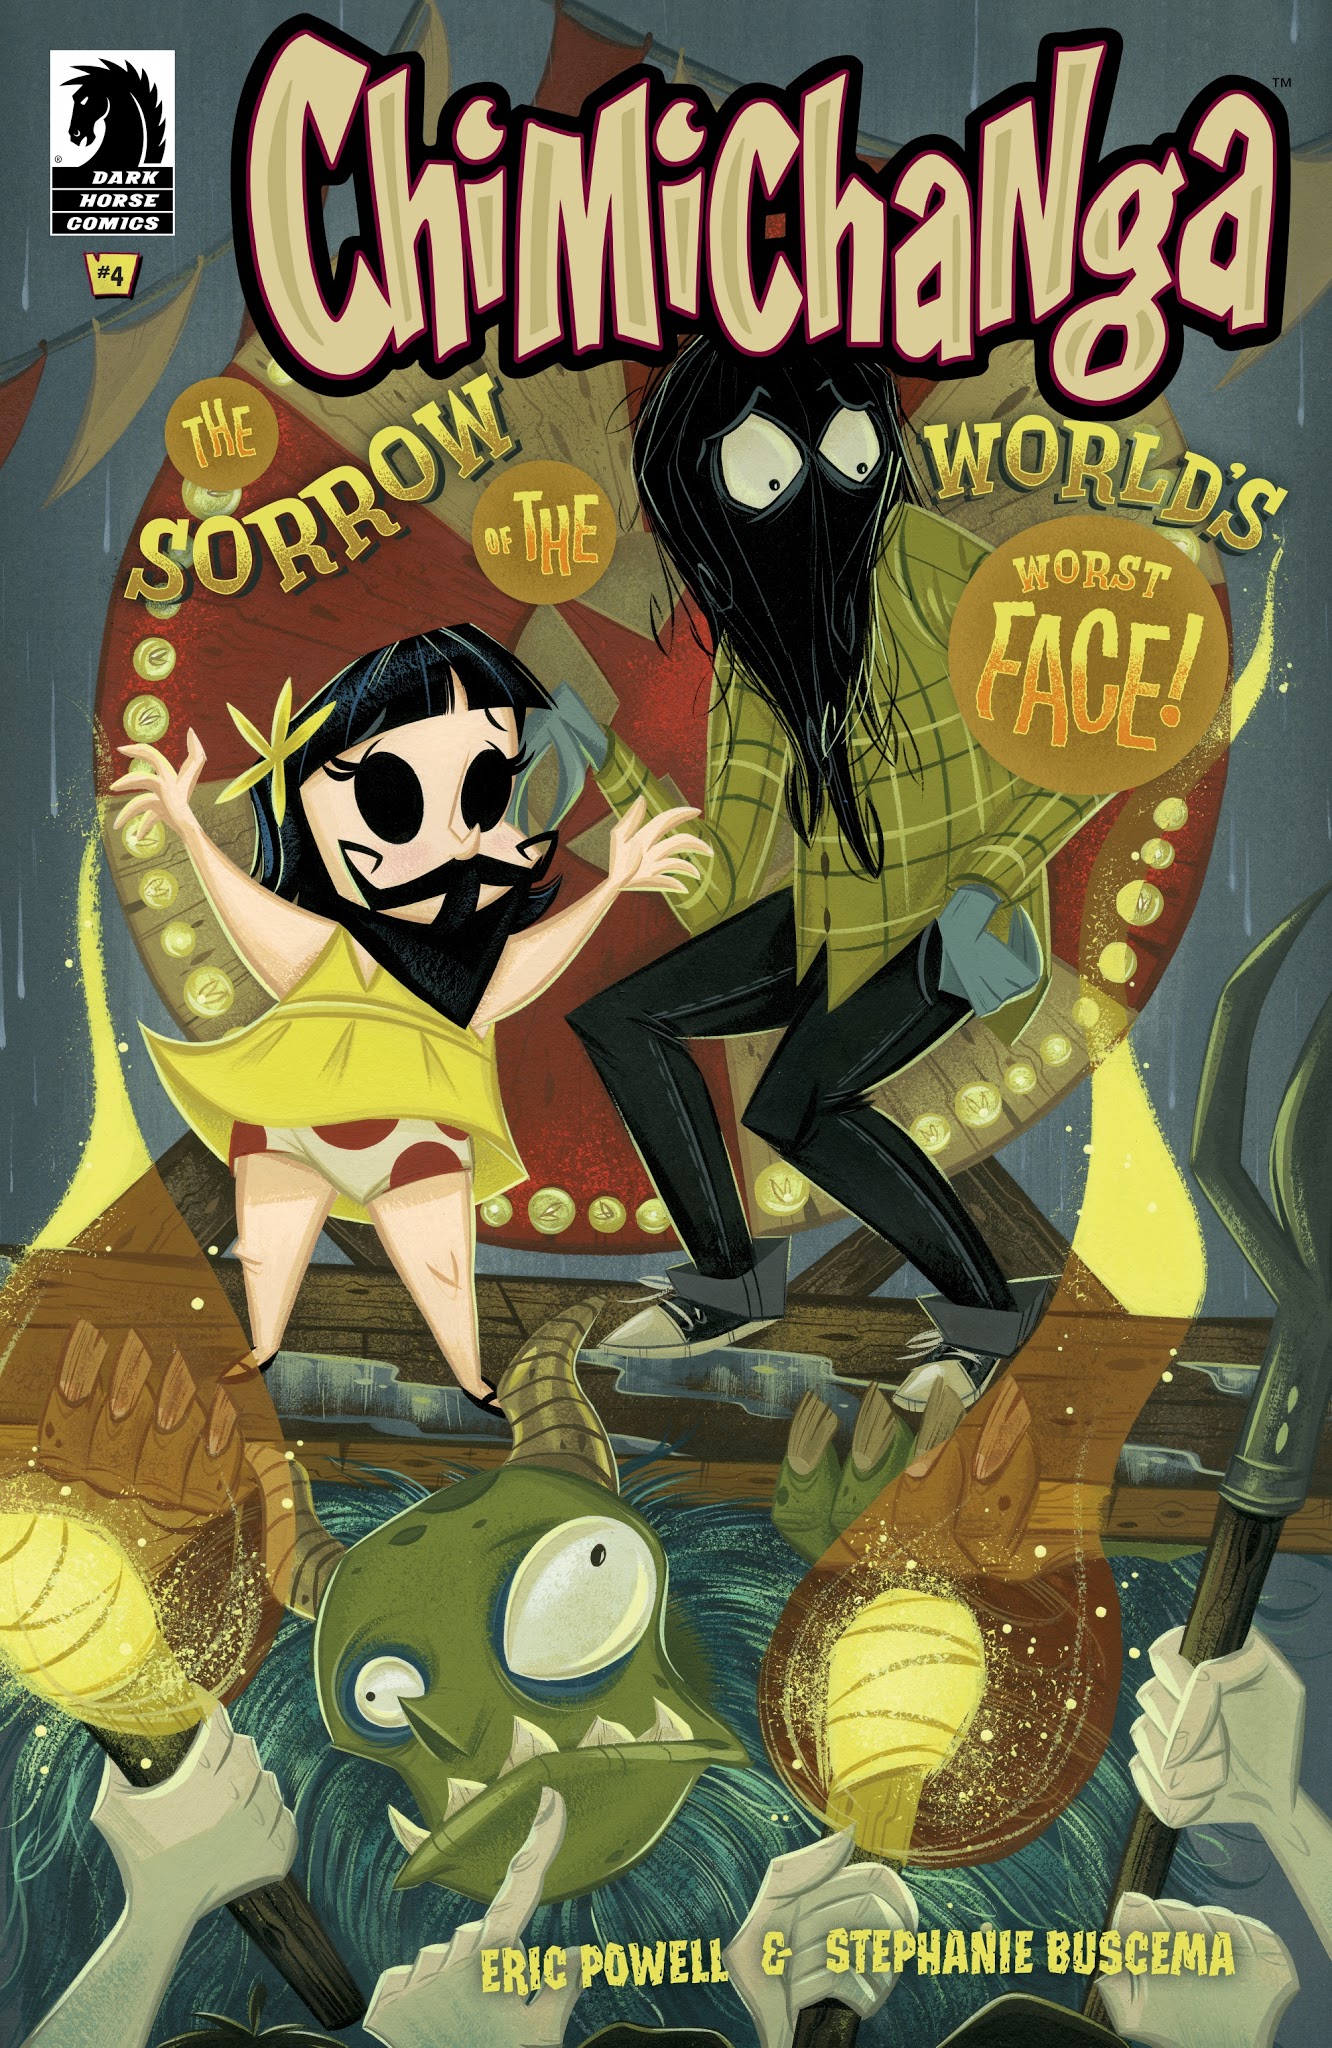 Read online Chimichanga: Sorrow of the World's Worst Face comic -  Issue #4 - 1